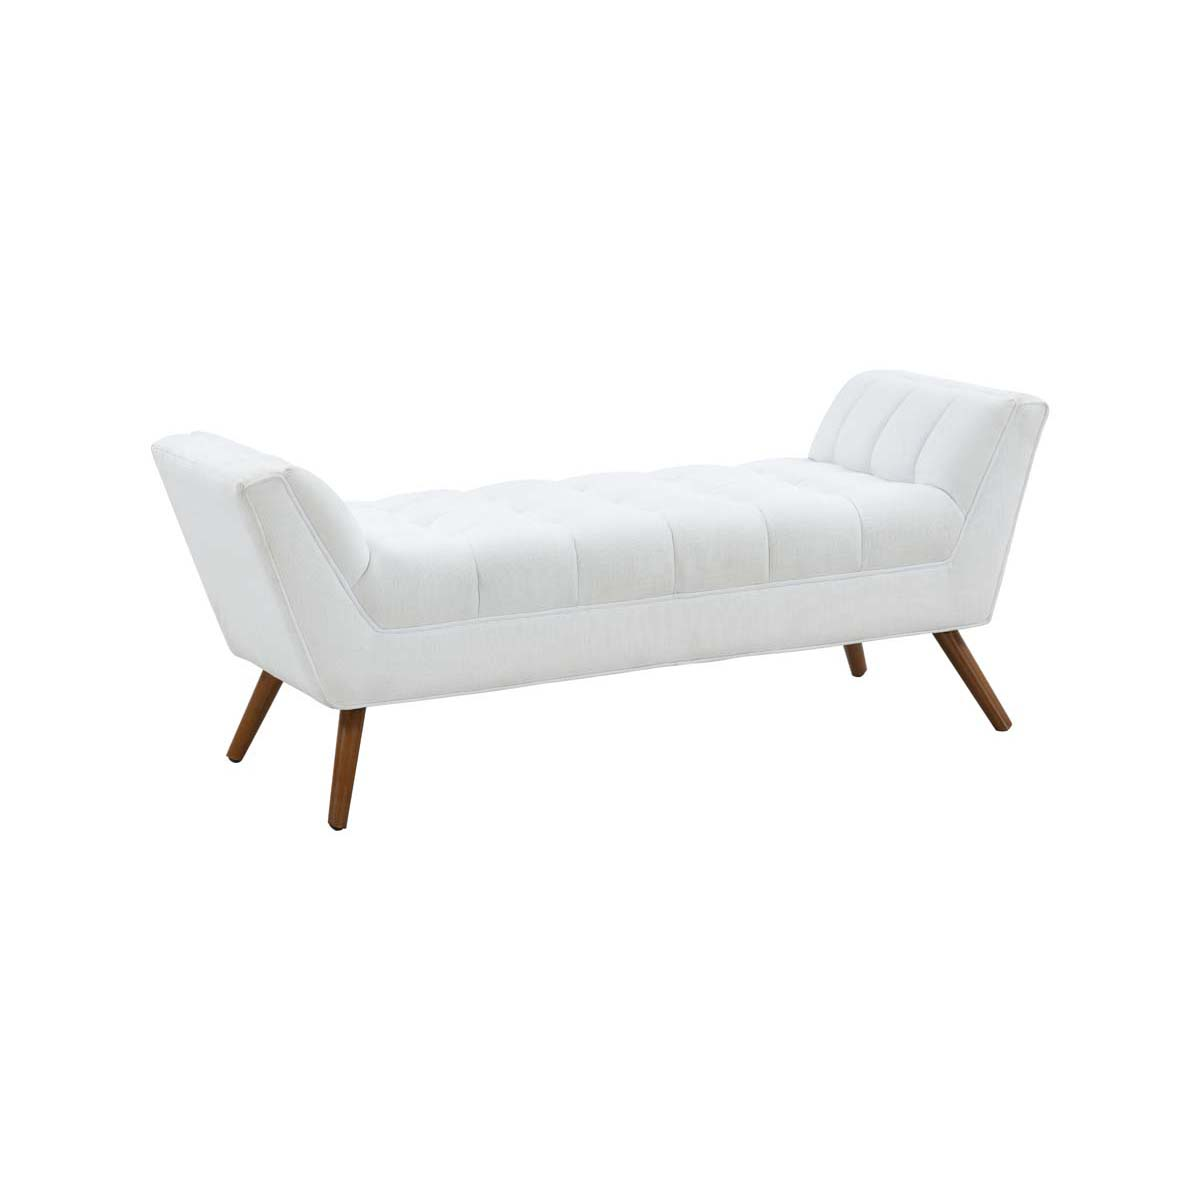 Safavieh Couture Damian Tufted Bench - White